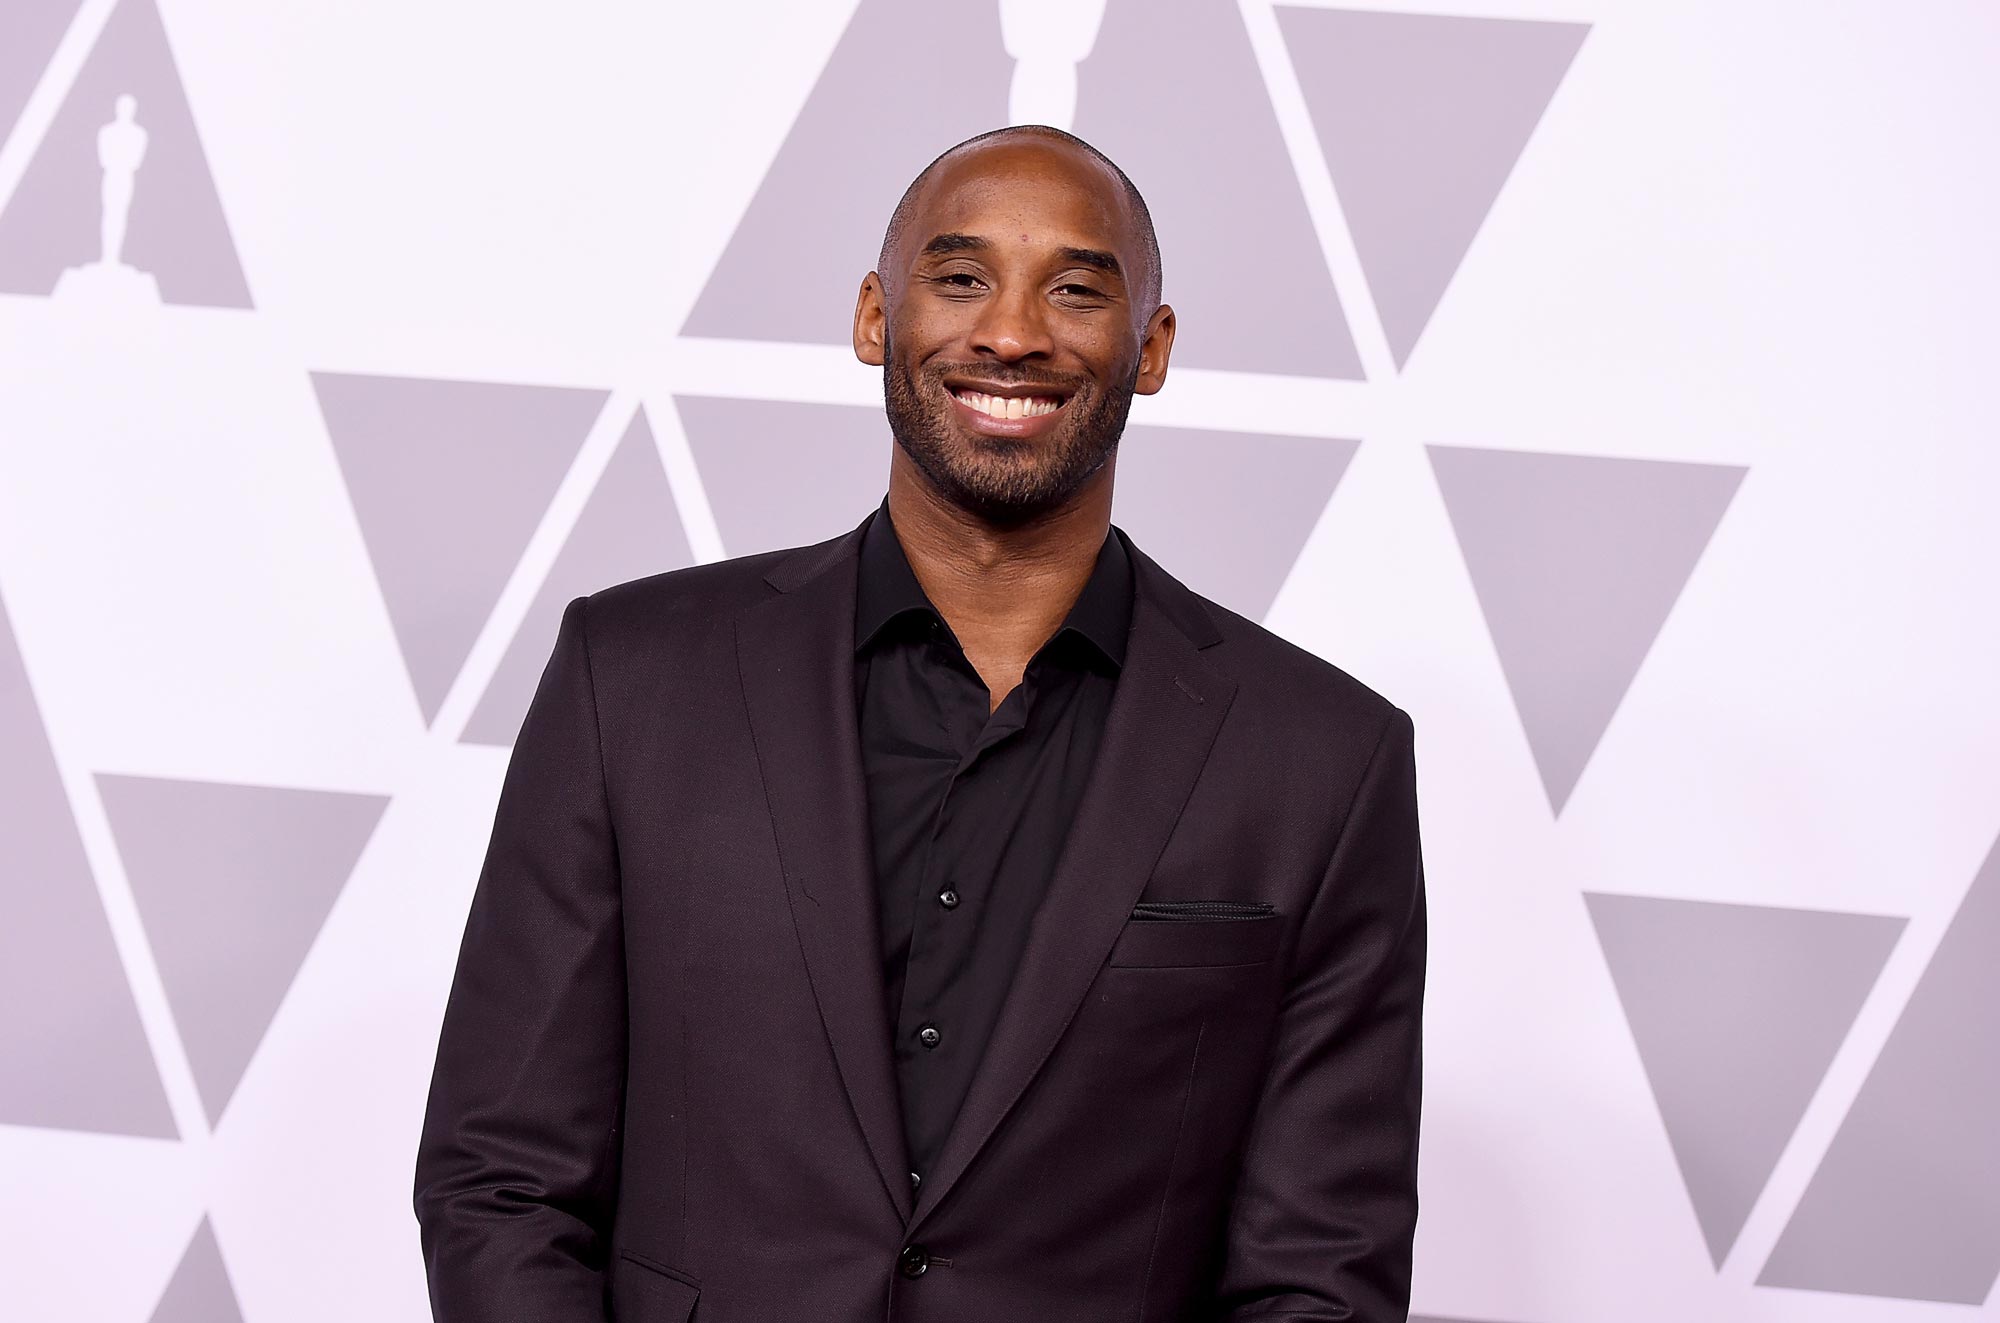 Kobe Bryant s Father Is Auctioning the Championship Ring the Late Basketball Player Gifted Him 367